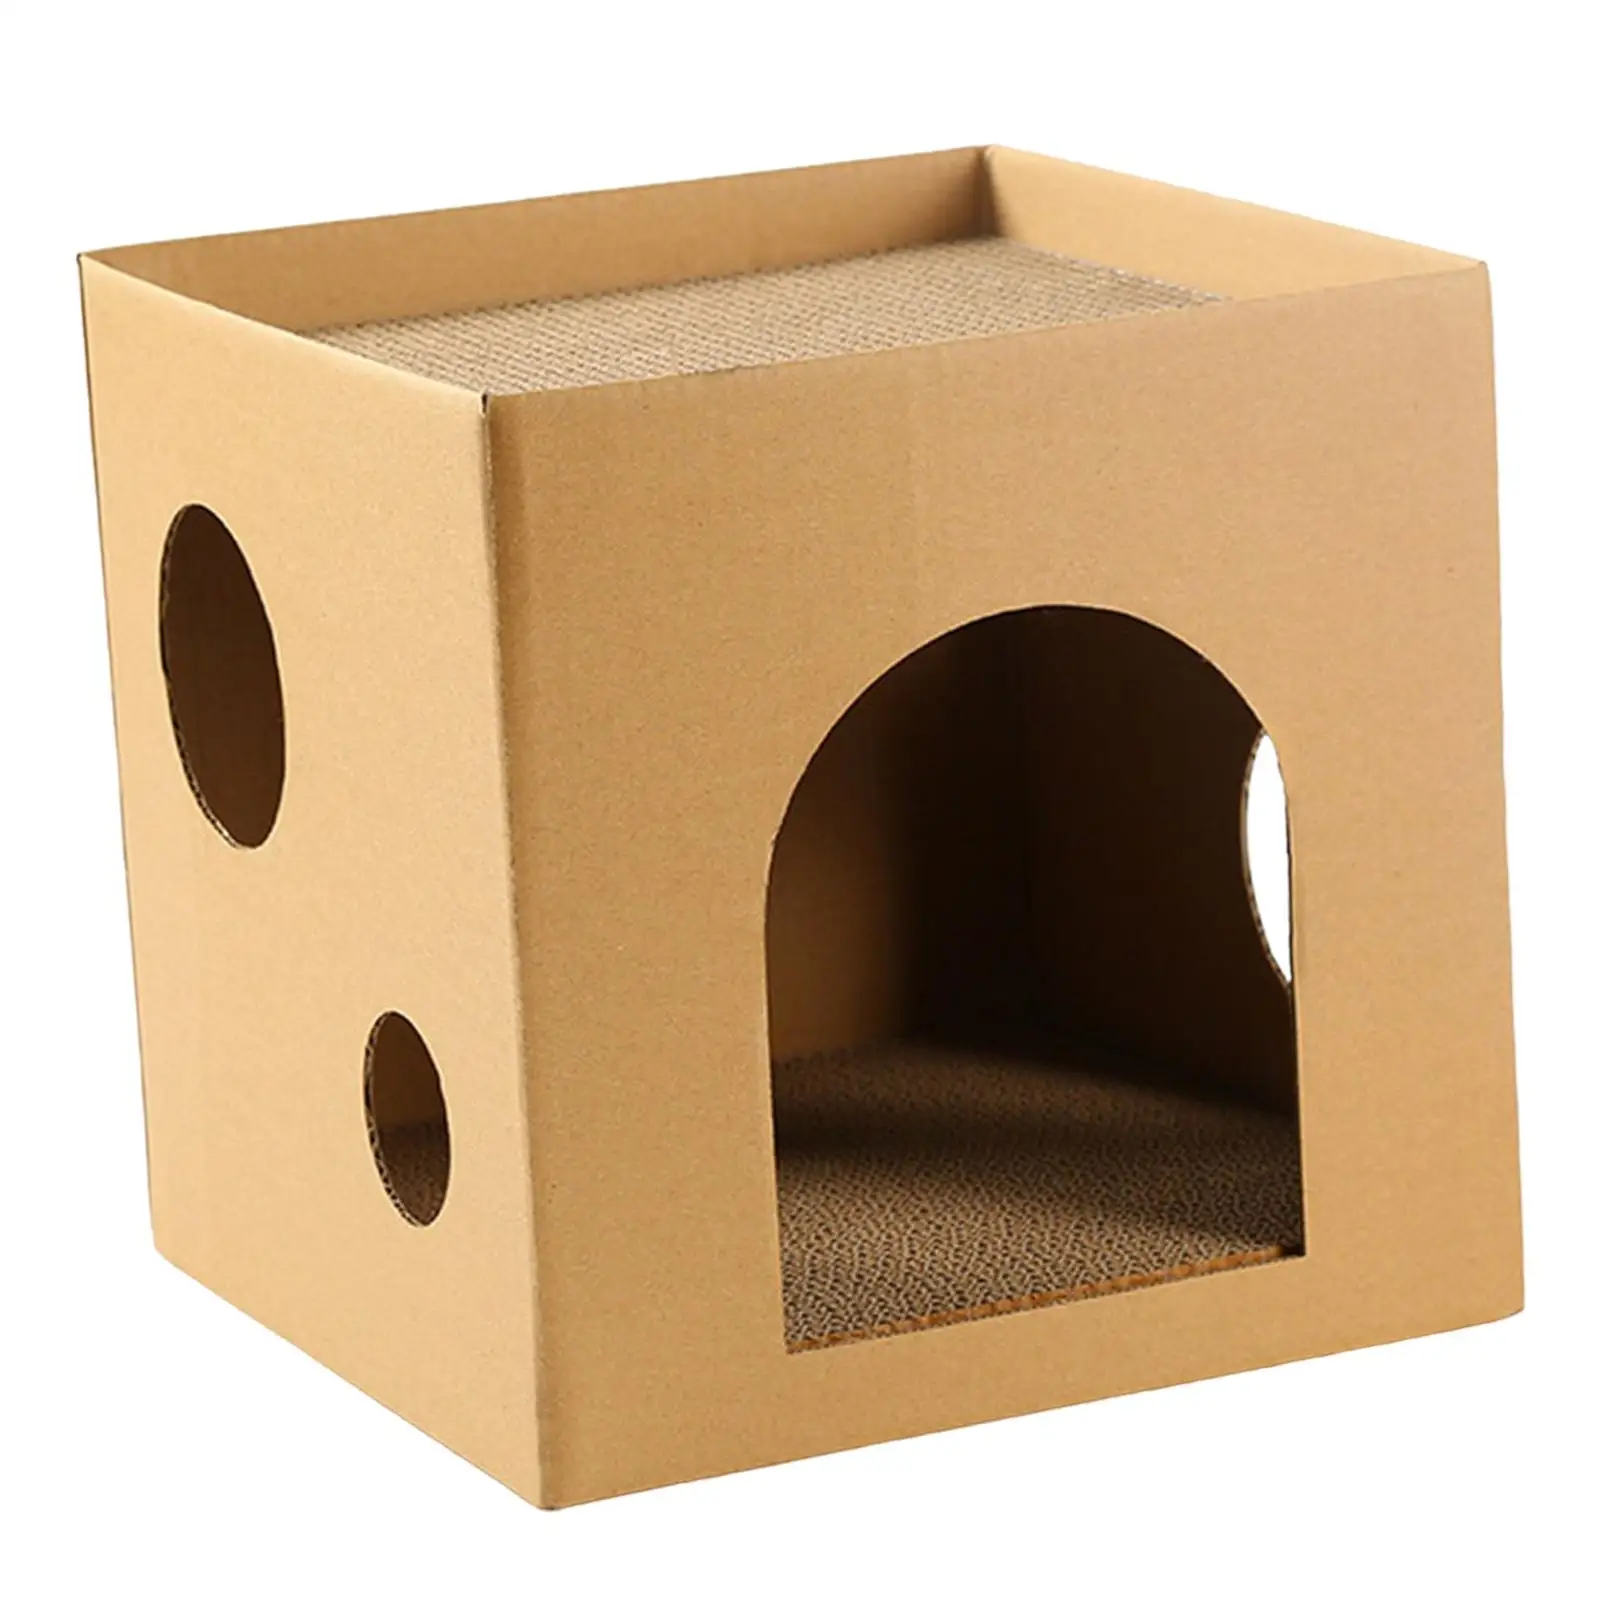 Cat Scratching Cardboard House Play House Hideaway Scratcher Bed Interactive Castle Training Toy Funny for Furniture Protector